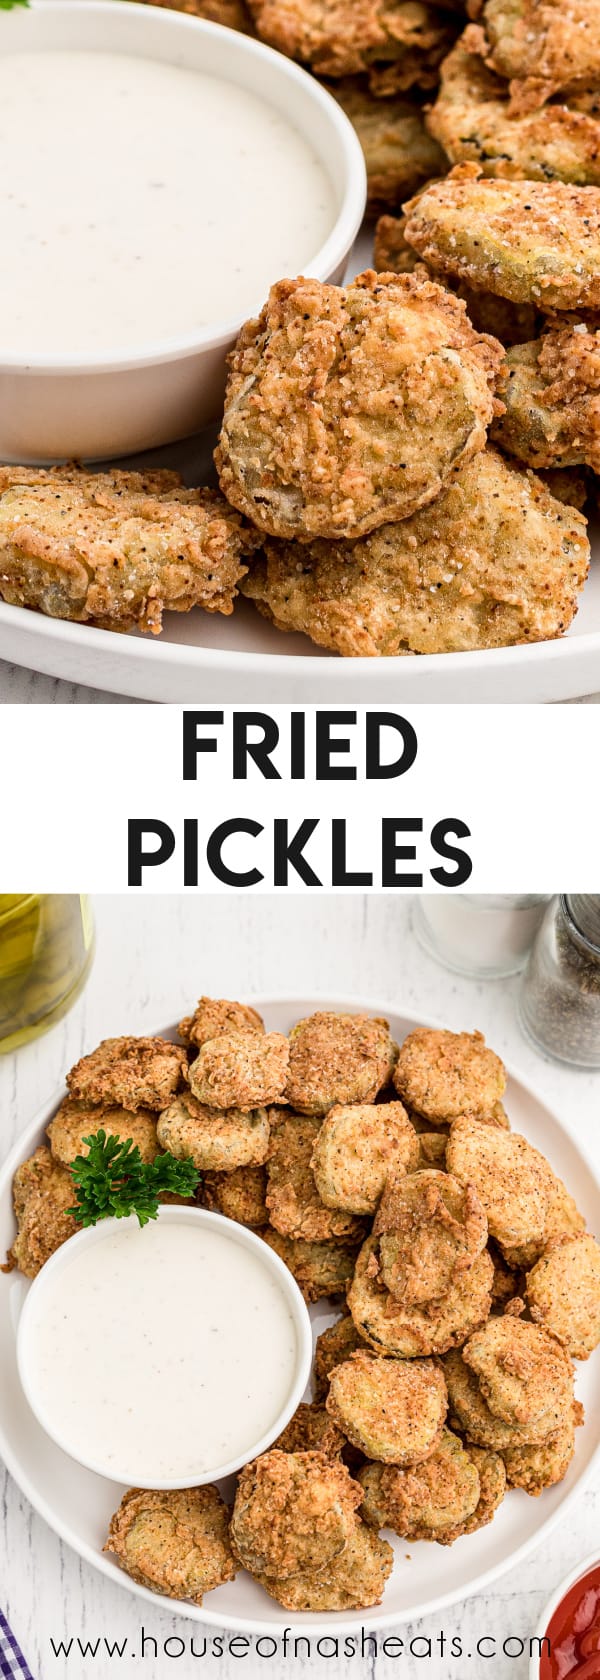 A collage of images of fried pickles with text overlay.